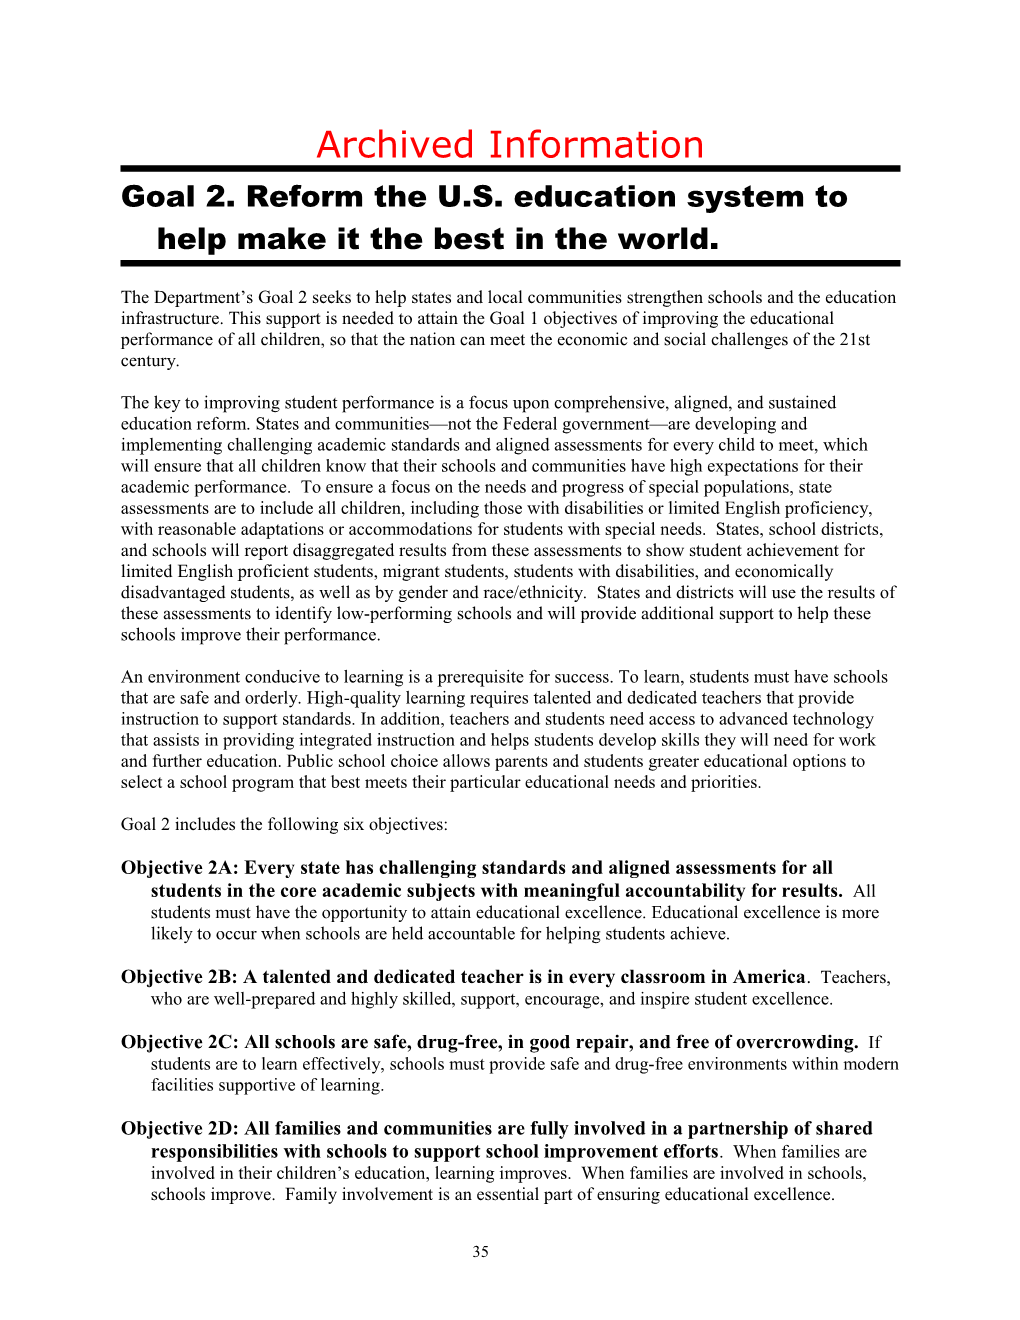 Archived - Goal 2 Reform the U.S. Education System to Help Make It the Best in the World